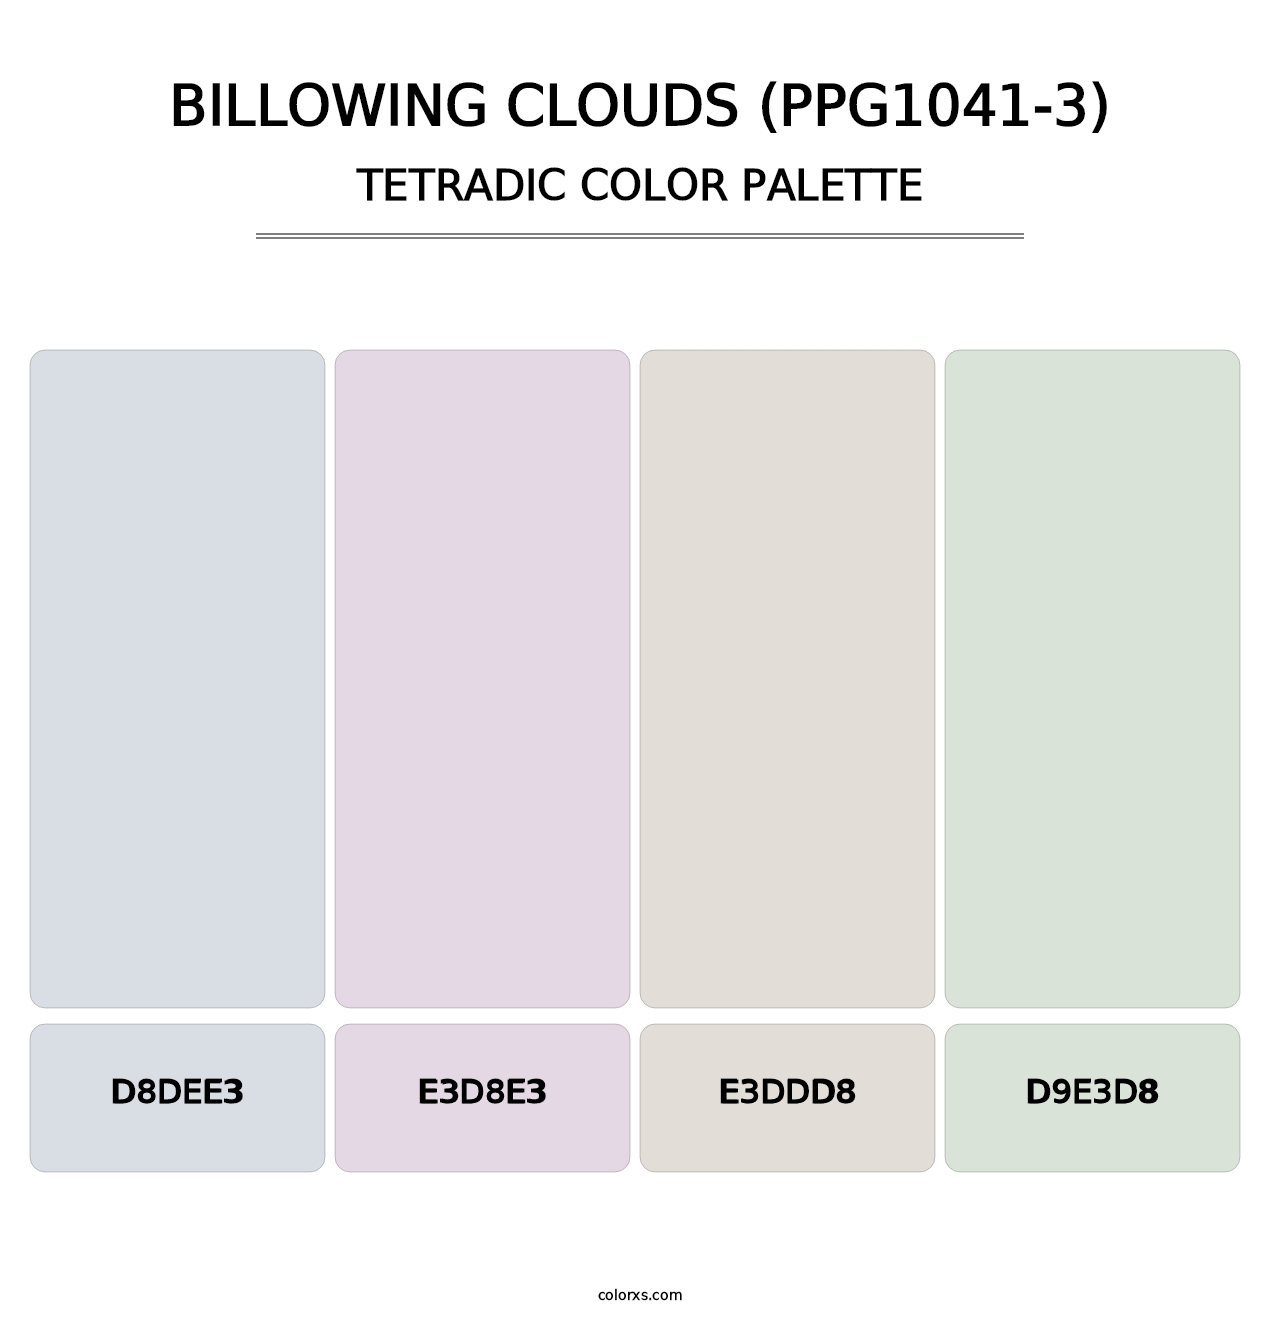 Billowing Clouds (PPG1041-3) - Tetradic Color Palette